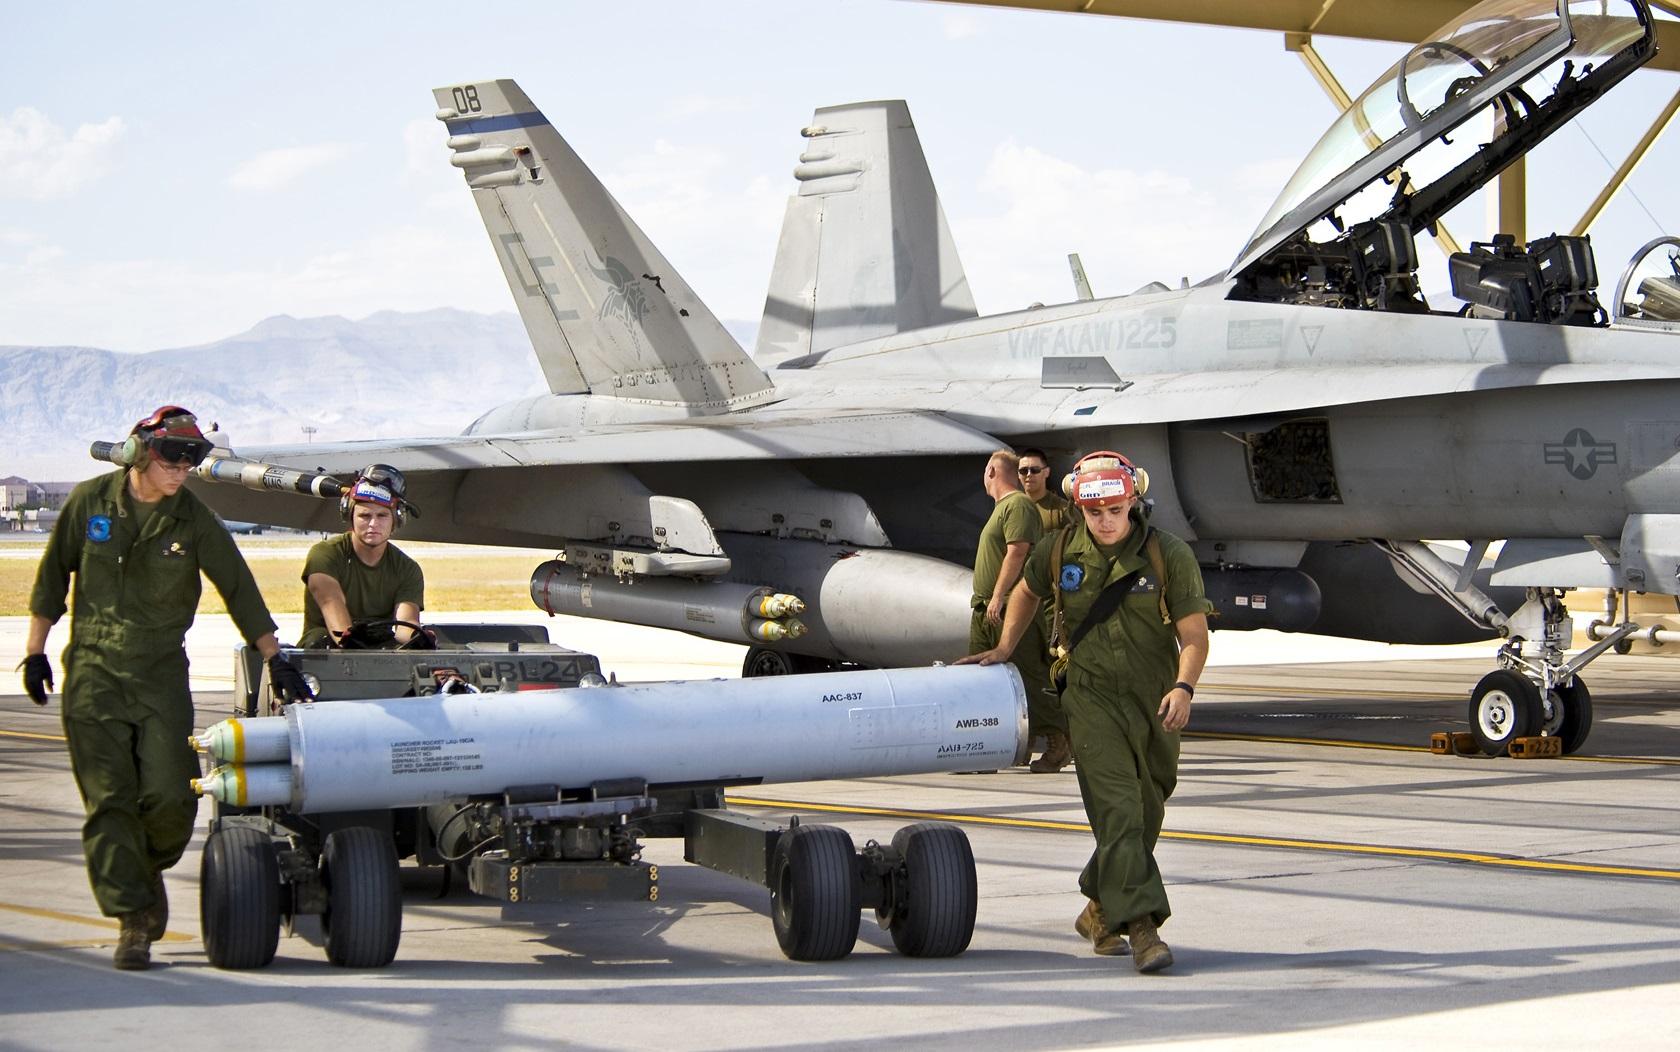 U.S. Marine Corps ordinance maintainers transport a LAU-10C/A Rocket Launcher at Nellis Air Force Base, Nevada (U.S. Air Force photo/Lawrence Crespo)